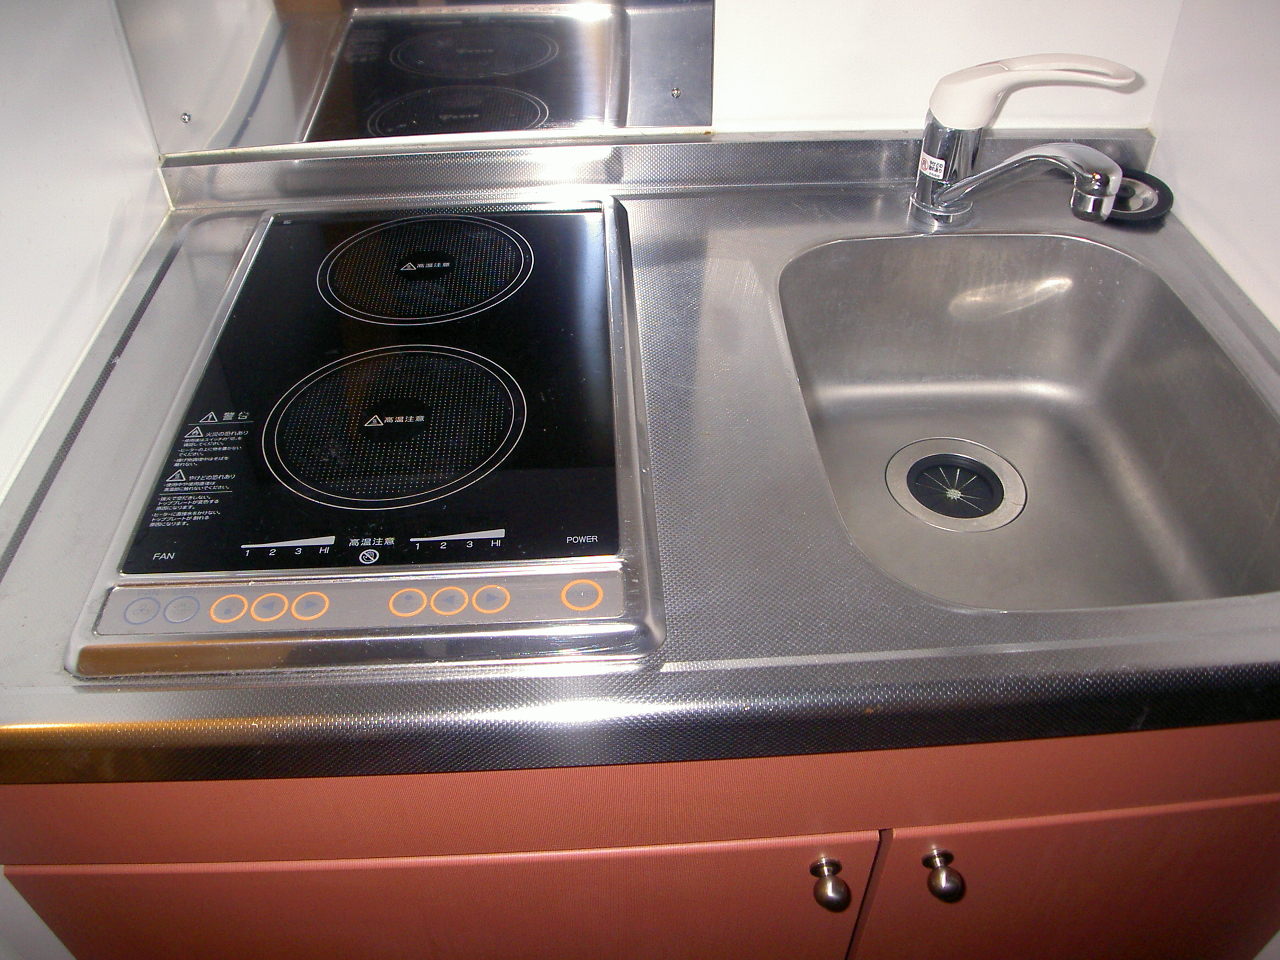 Other Equipment. Stove ・ sink